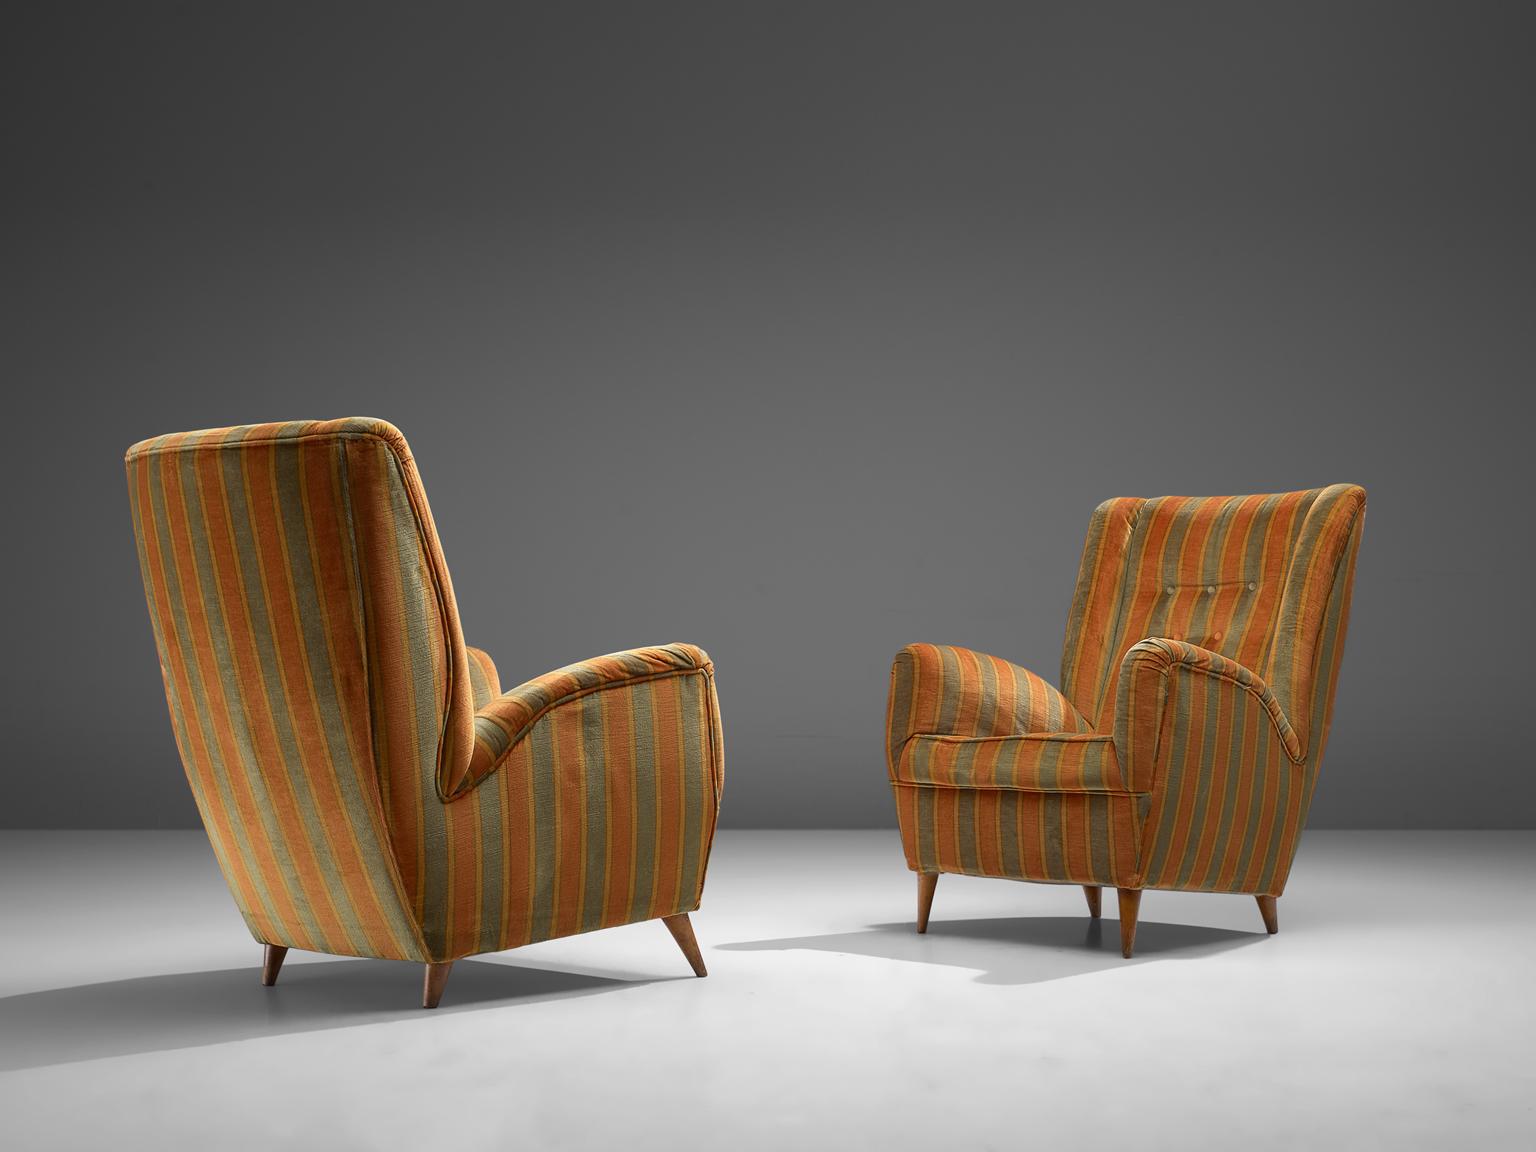 Pair of lounge chairs, fabric and wood, Italy, 1950s. 

An elegant pair of Italian Lounge chairs in the manner of Gio Ponti. What really characterizes these chairs are their theatrical, uplifting armrests and medium high back in combination with